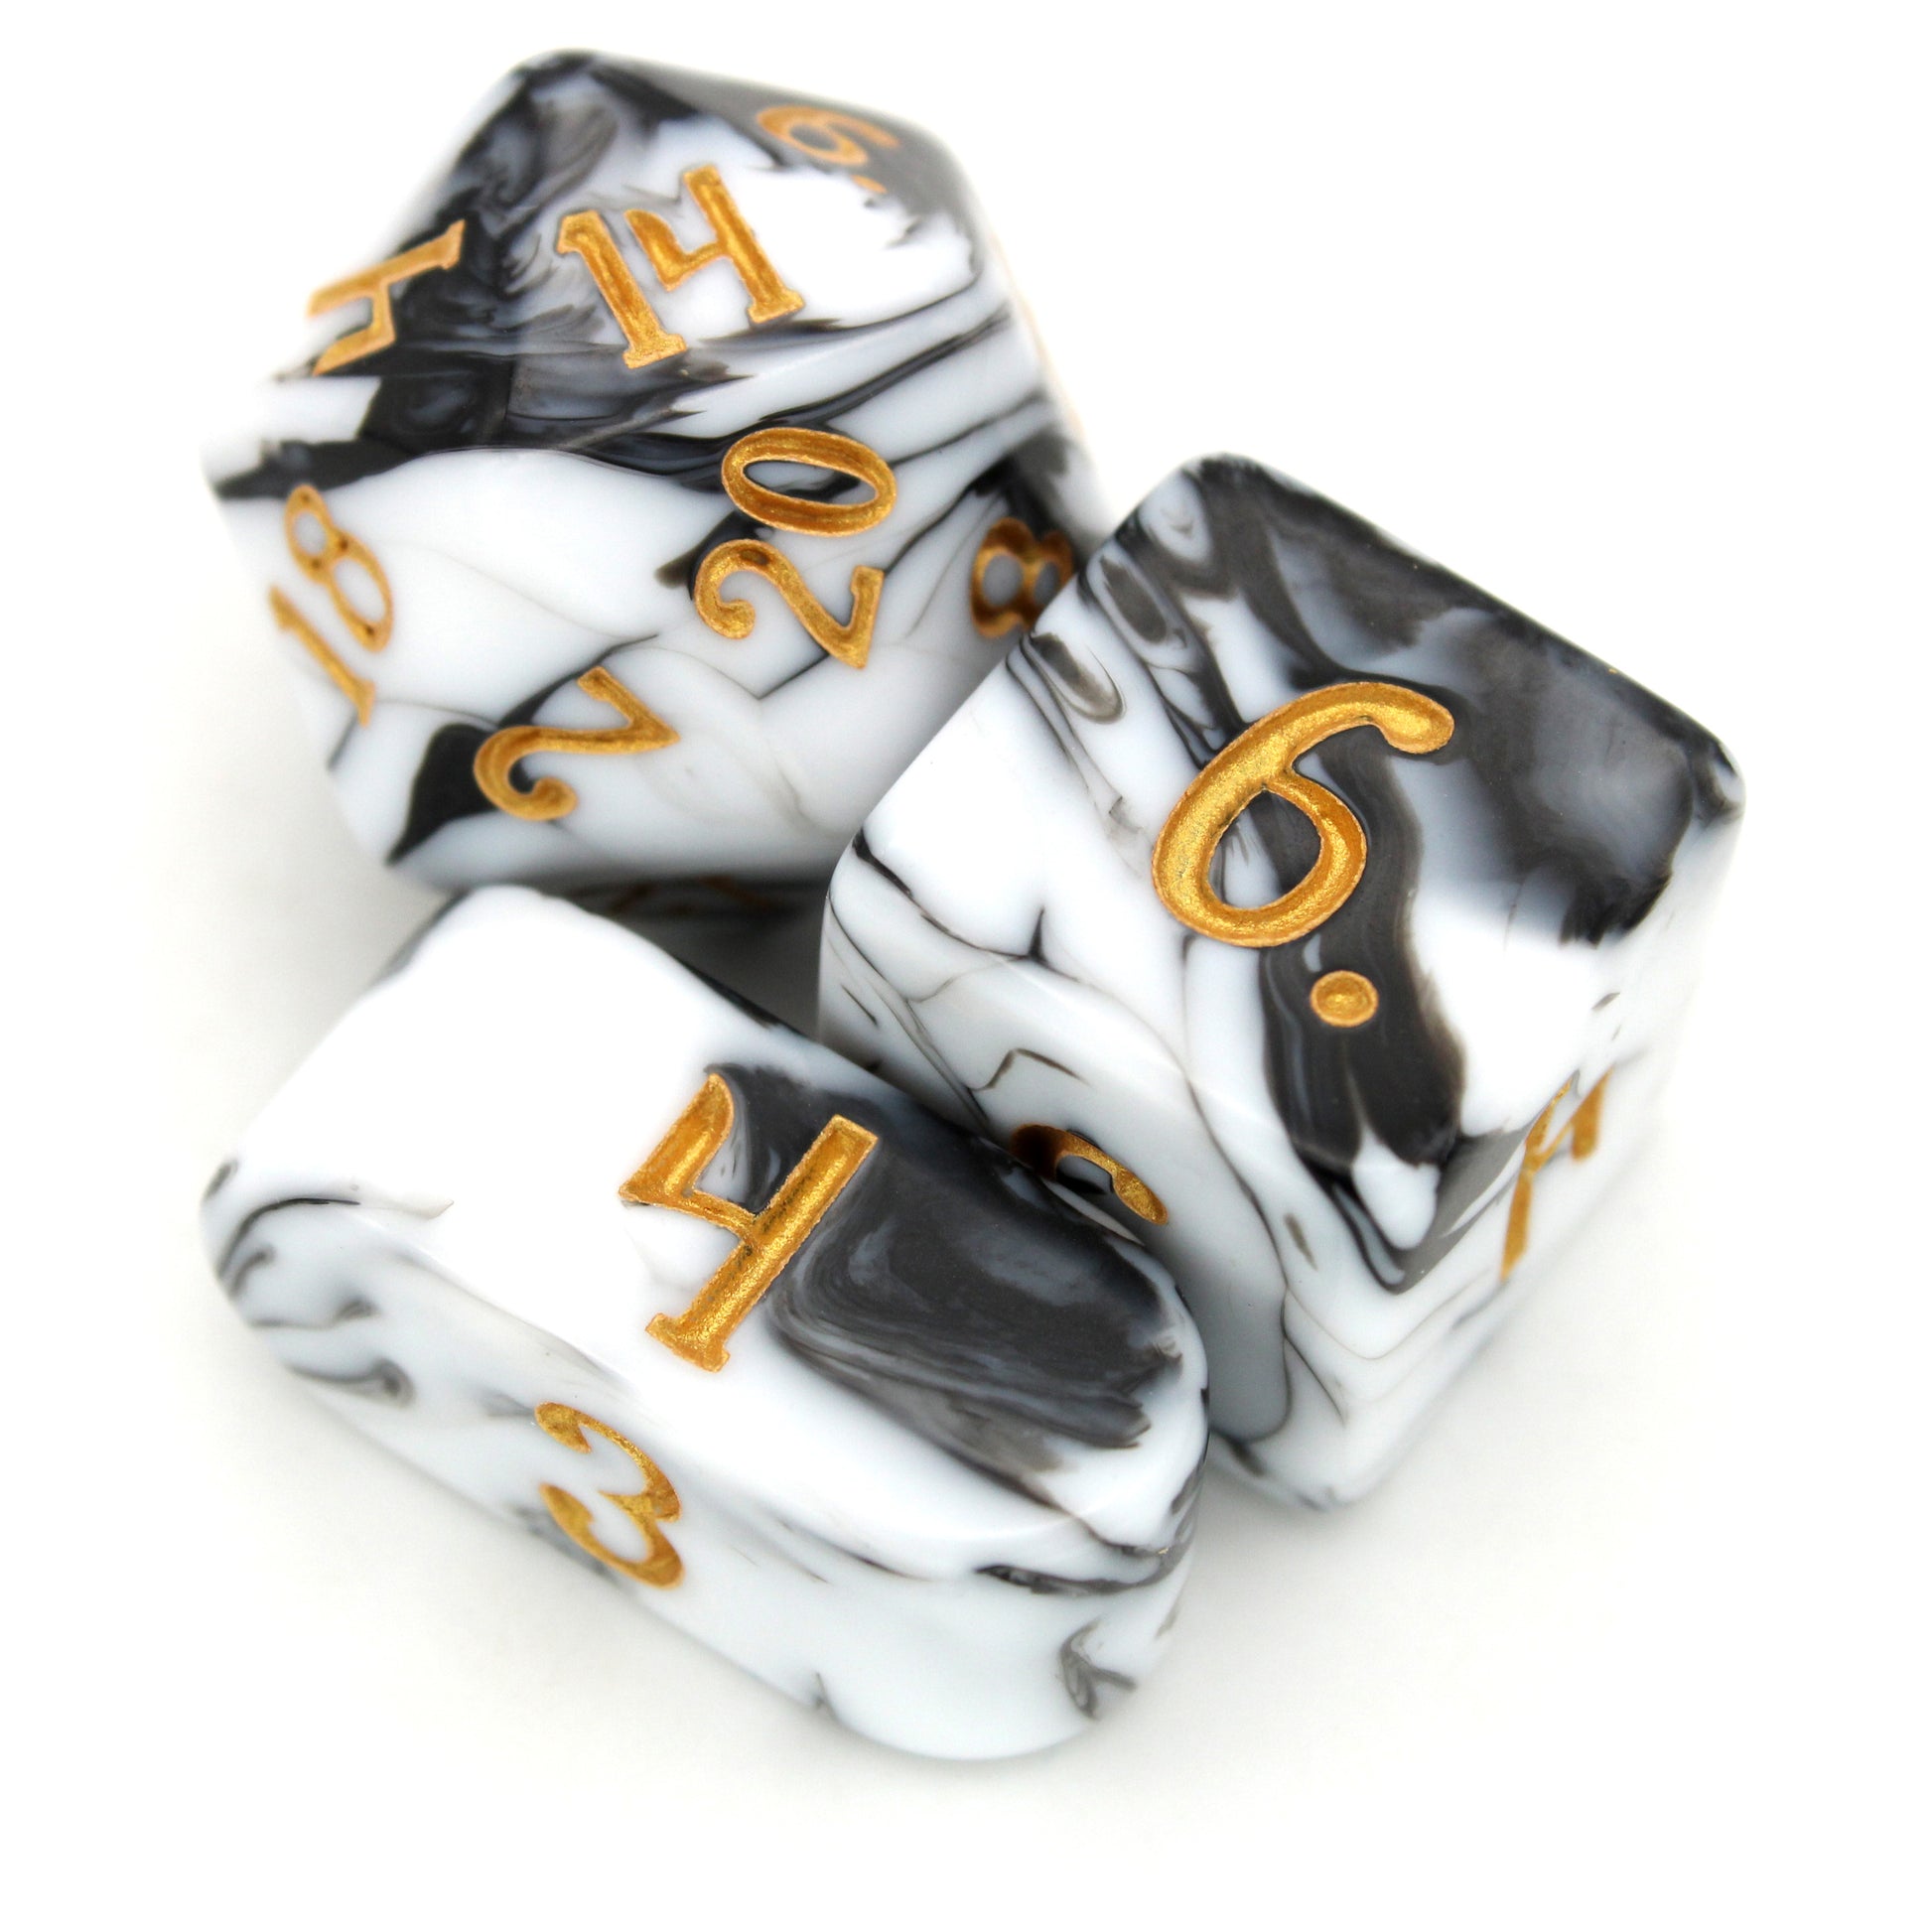 DLucks is a 10-piece, black and white swirled acrylic set with gold ink.